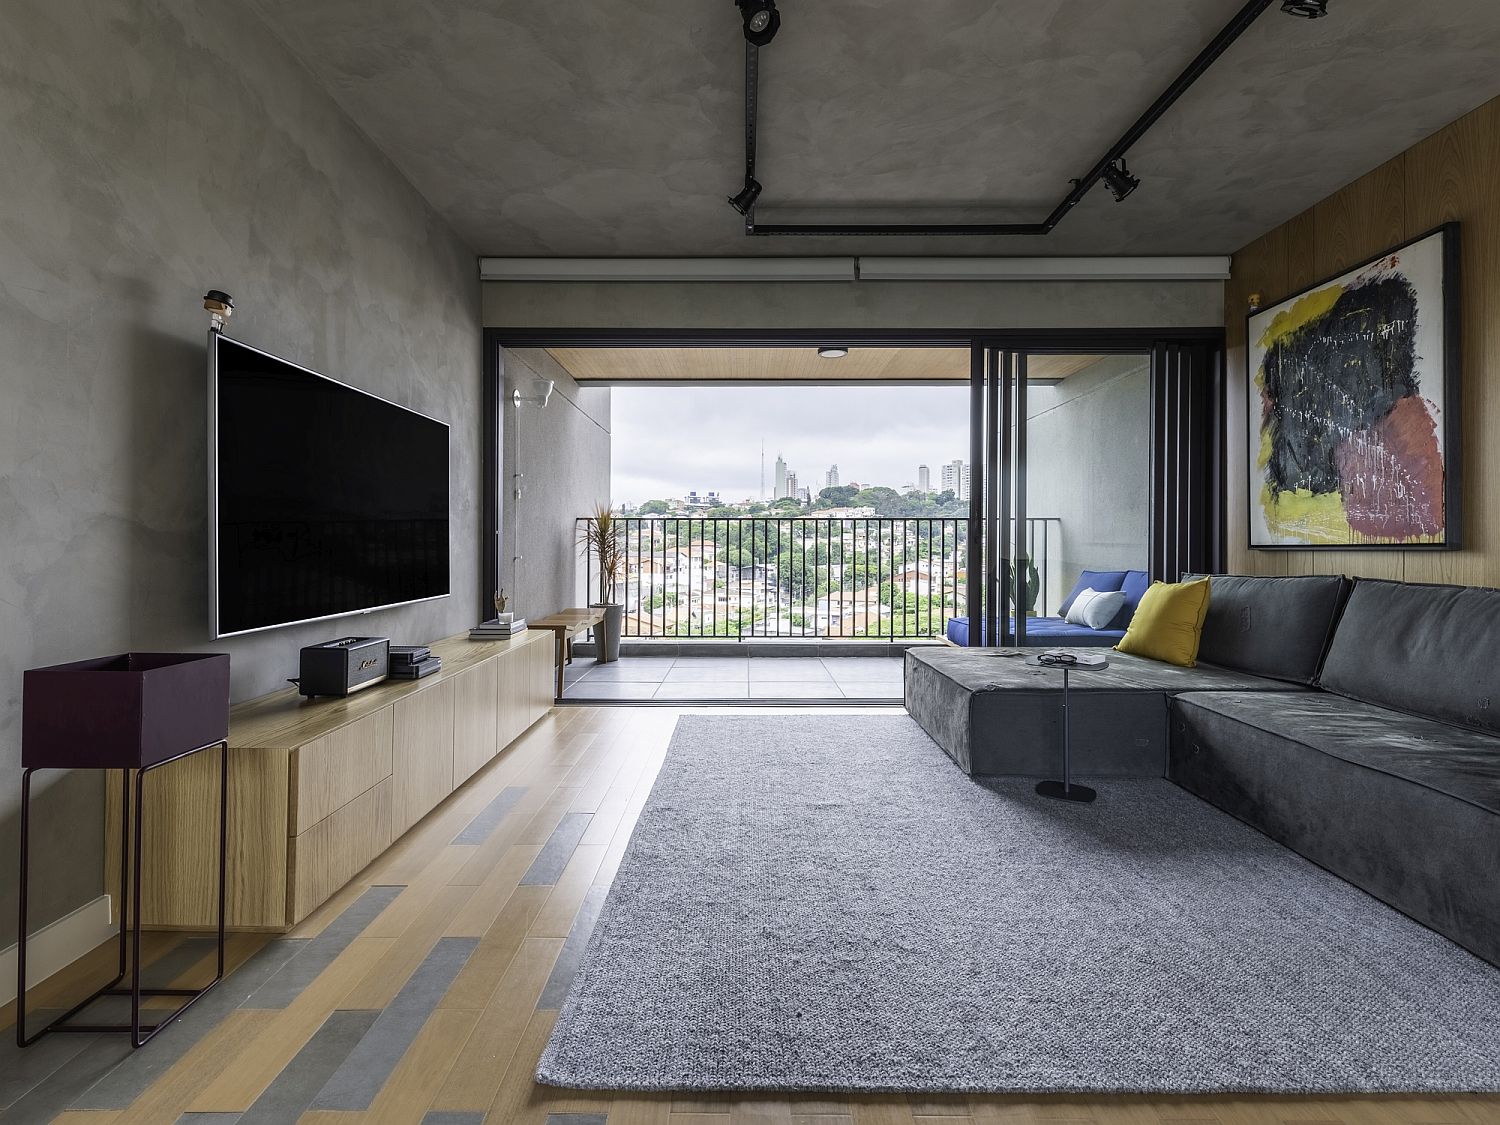 Spacious-living-room-with-wooden-floor-and-concrete-ceiling-and-walls-35918